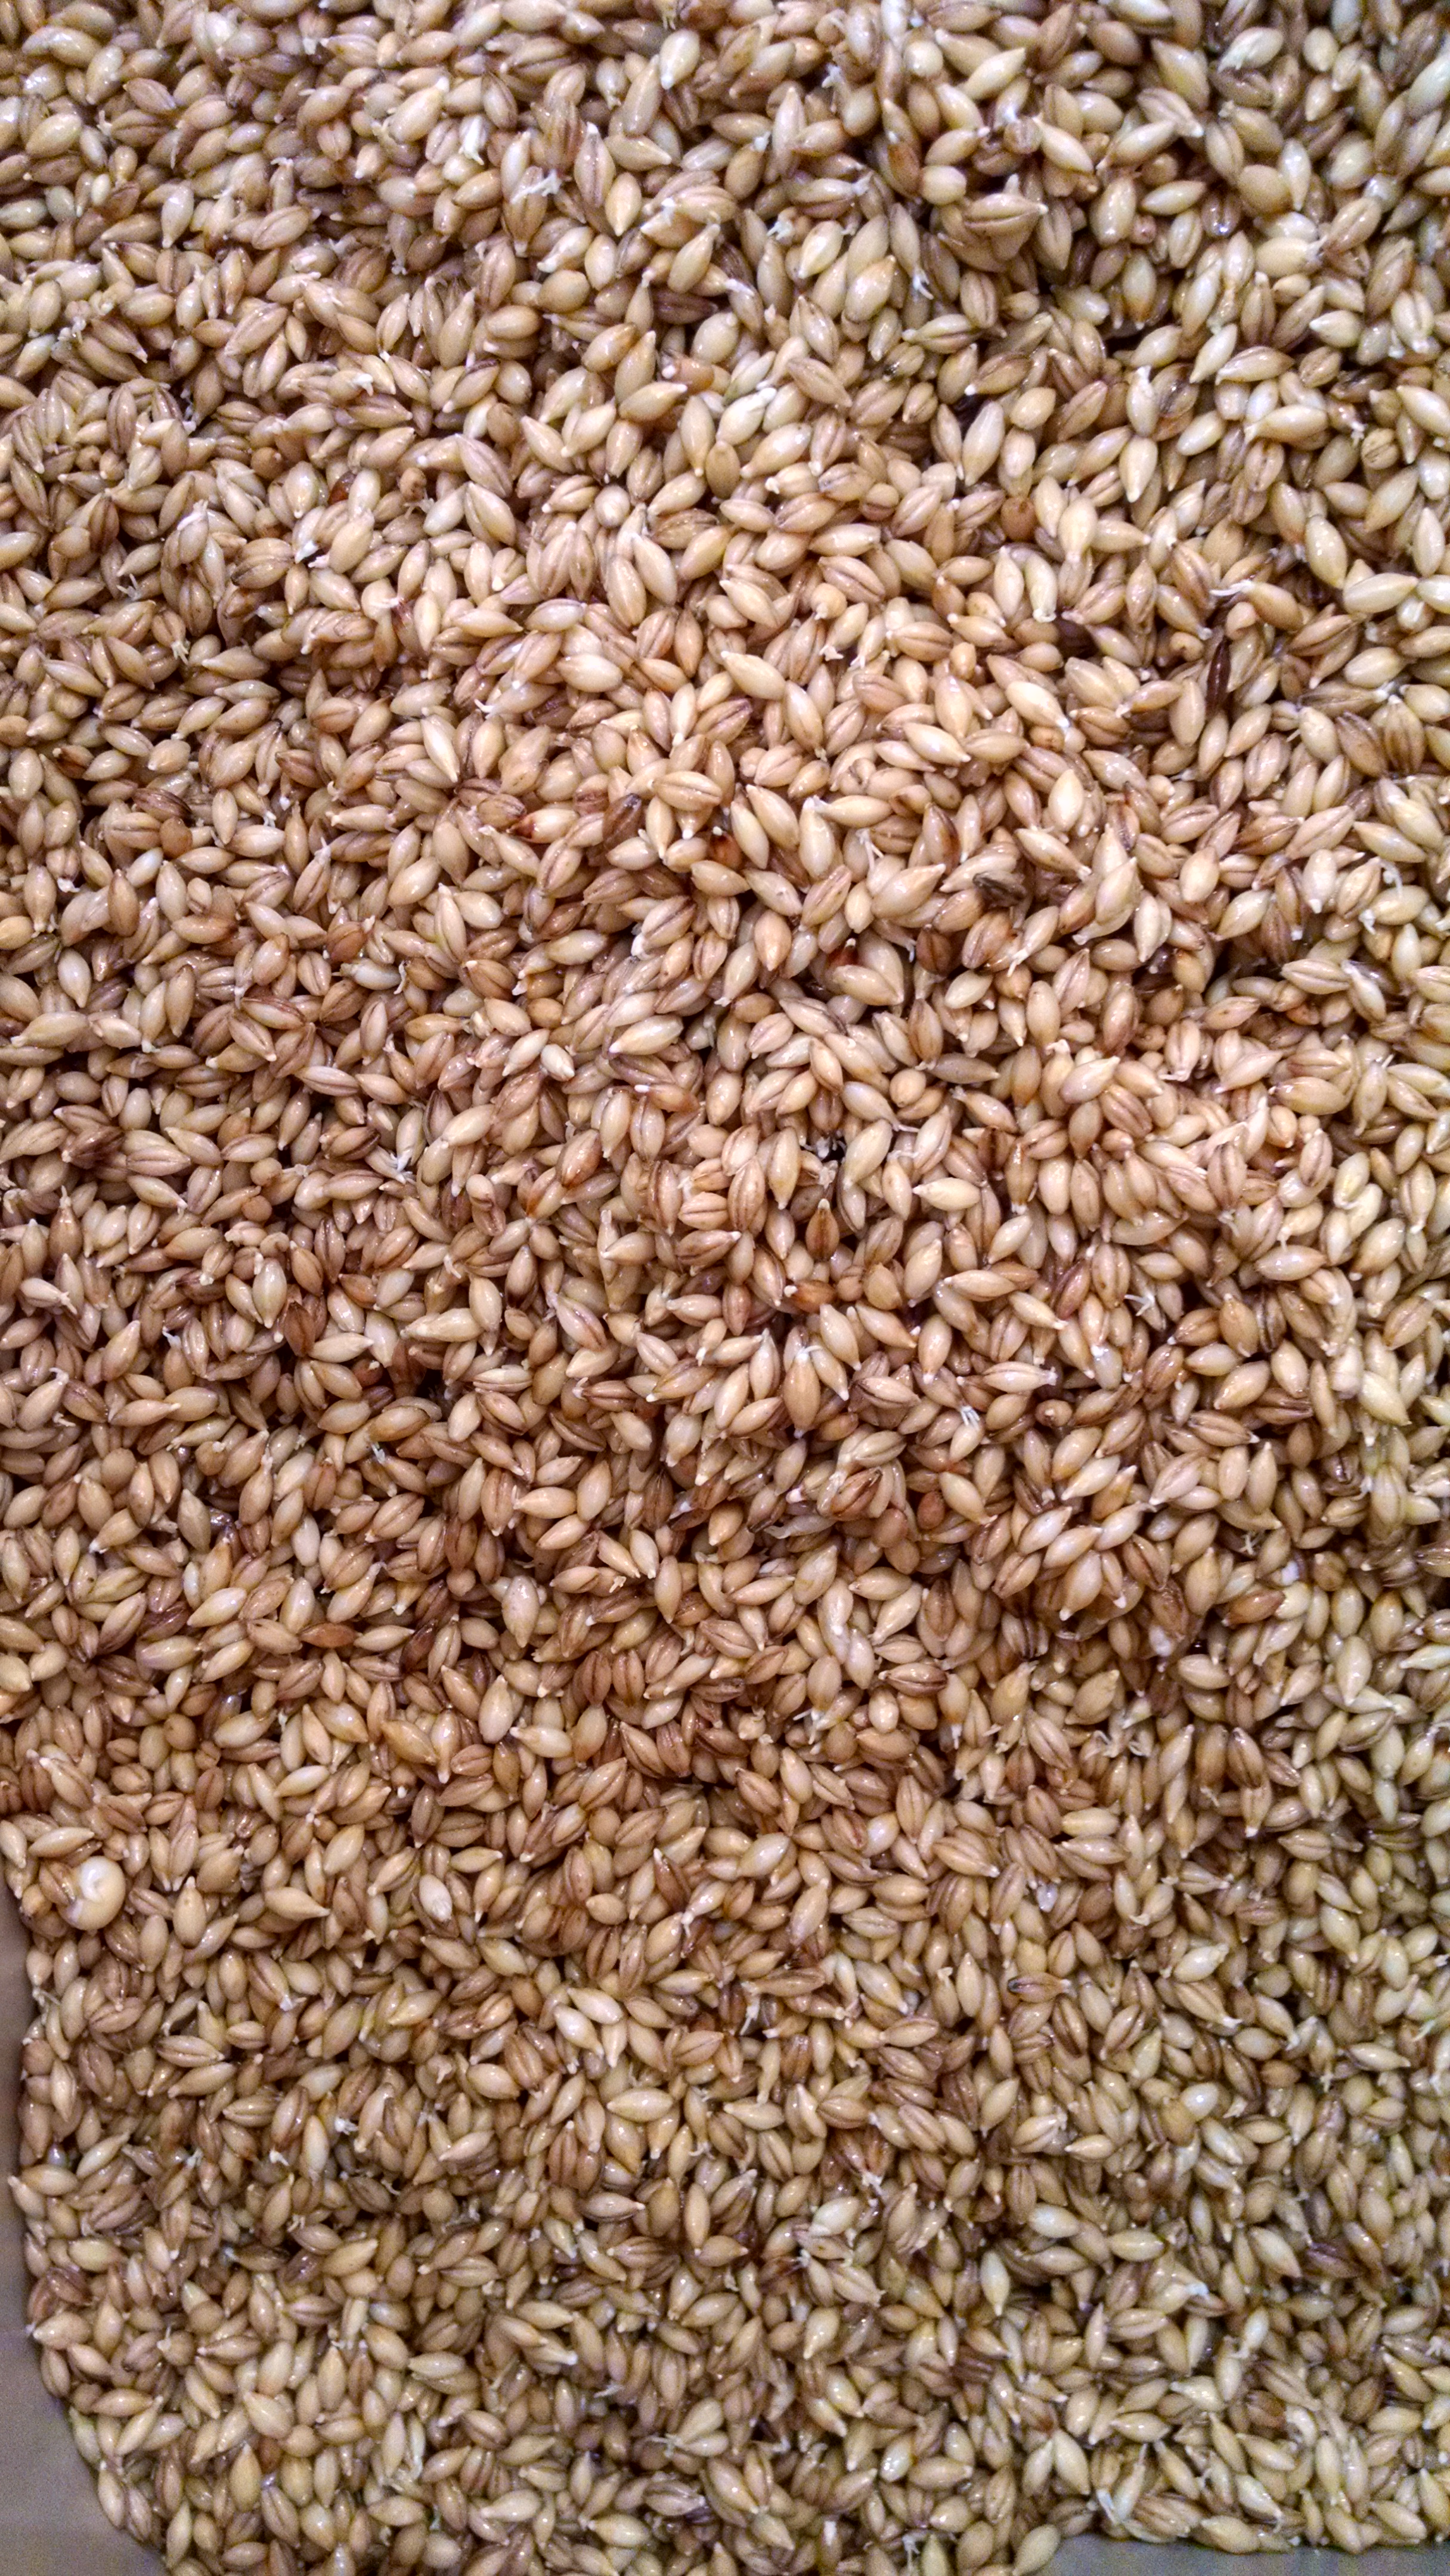 chitted grain from steep.jpg